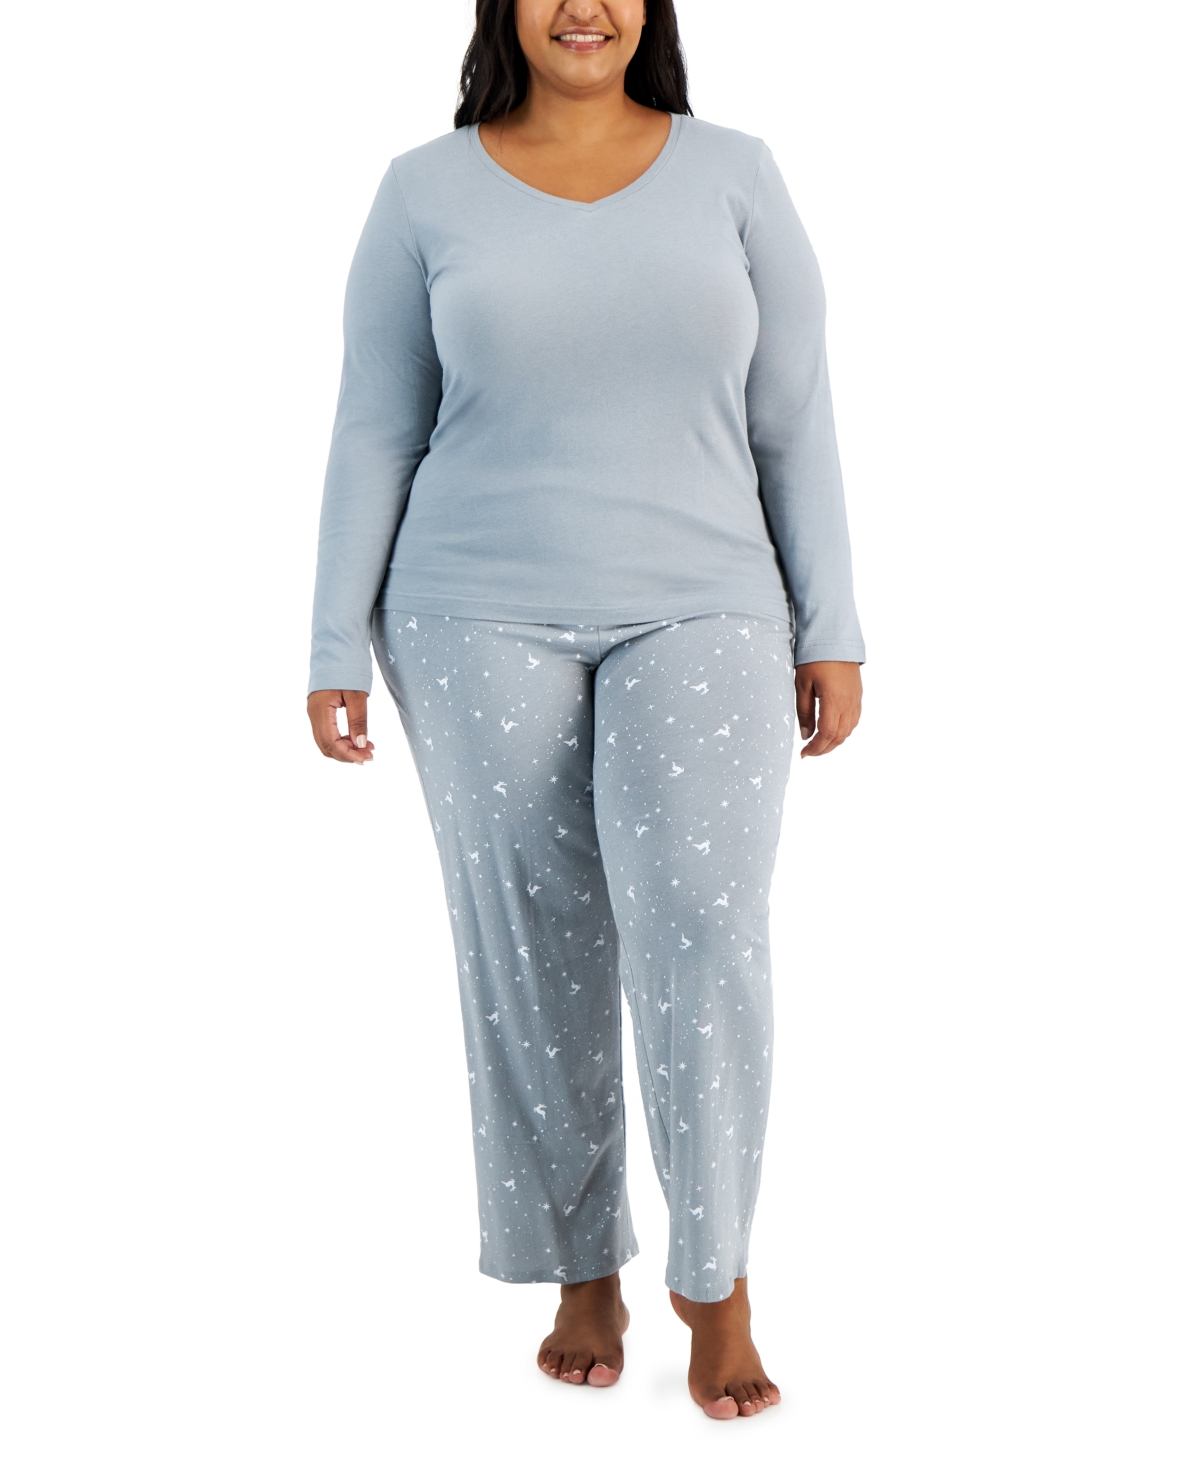 Charter Club Plus Size Long-Sleeve Top & Printed Pants Cotton Pajama Set, Created for Macy's